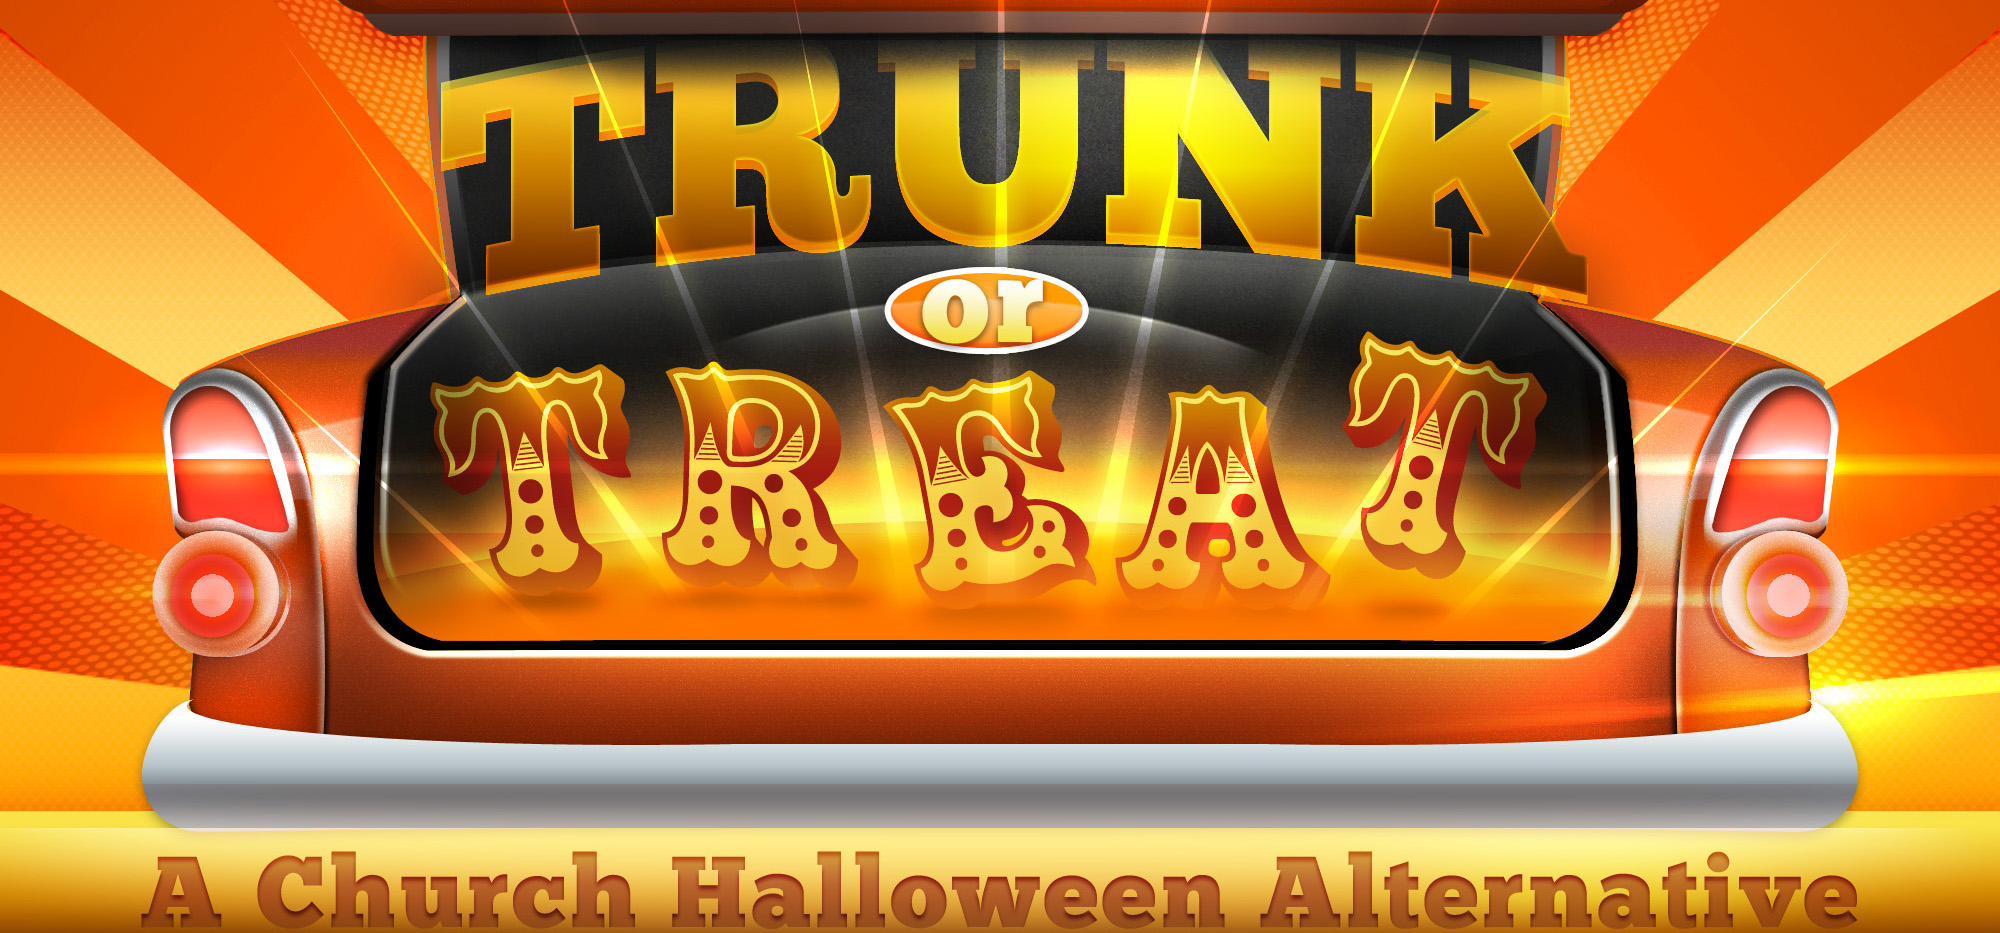 Trunk or treat forks of dix river baptist church clipart 2